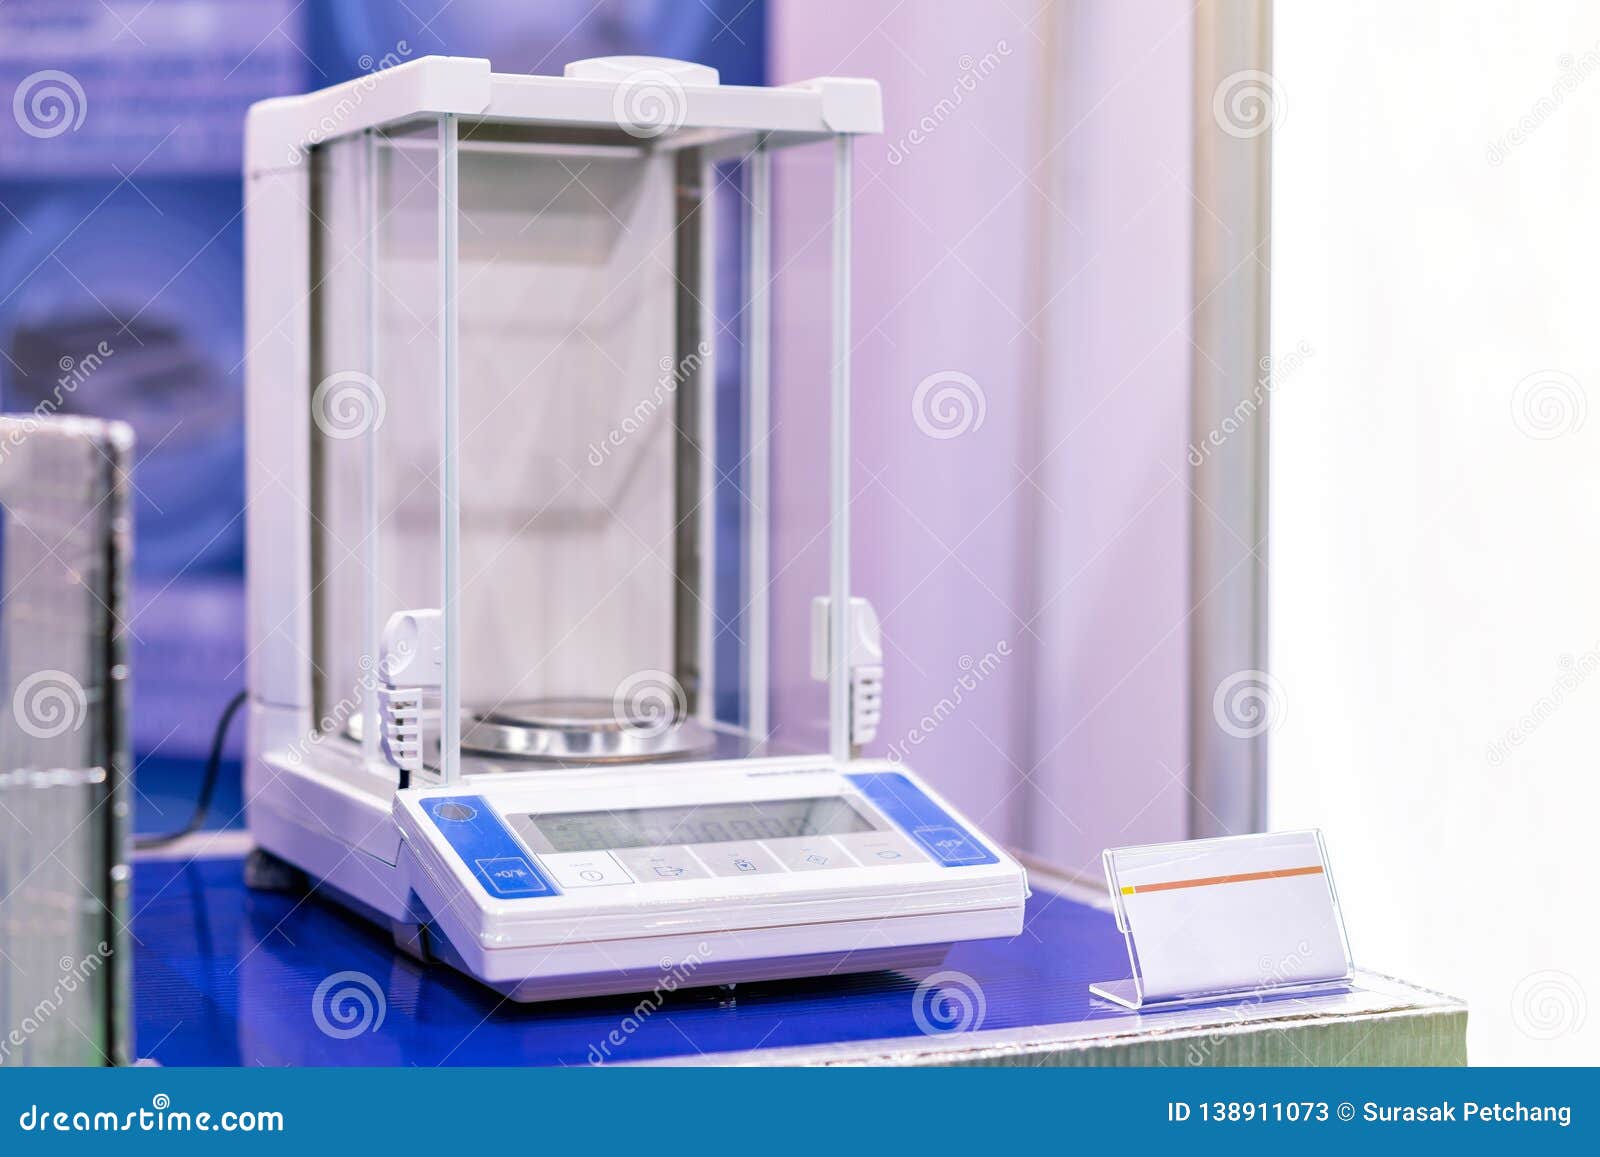 Digital High Precision Scale Weight Measurement